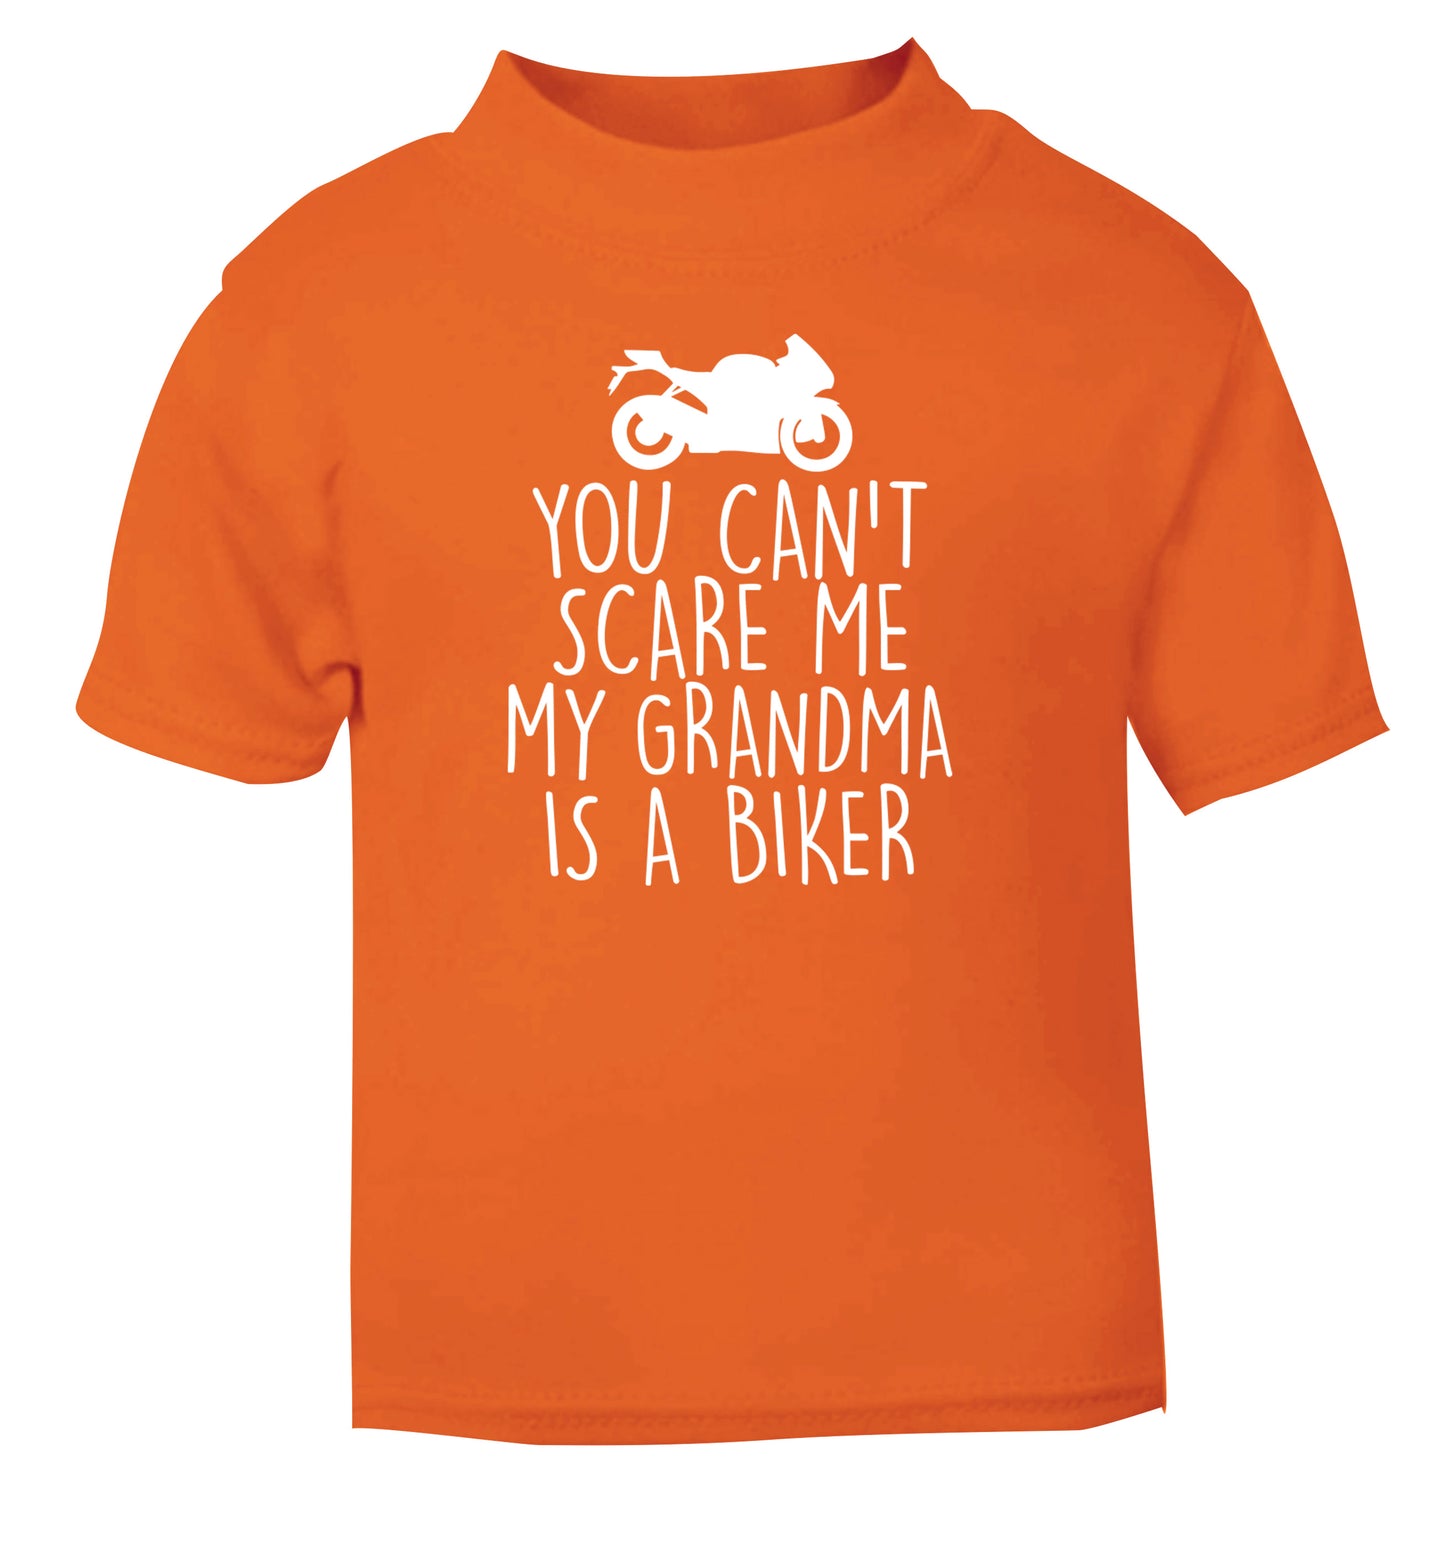 You can't scare me my grandma is a biker orange Baby Toddler Tshirt 2 Years